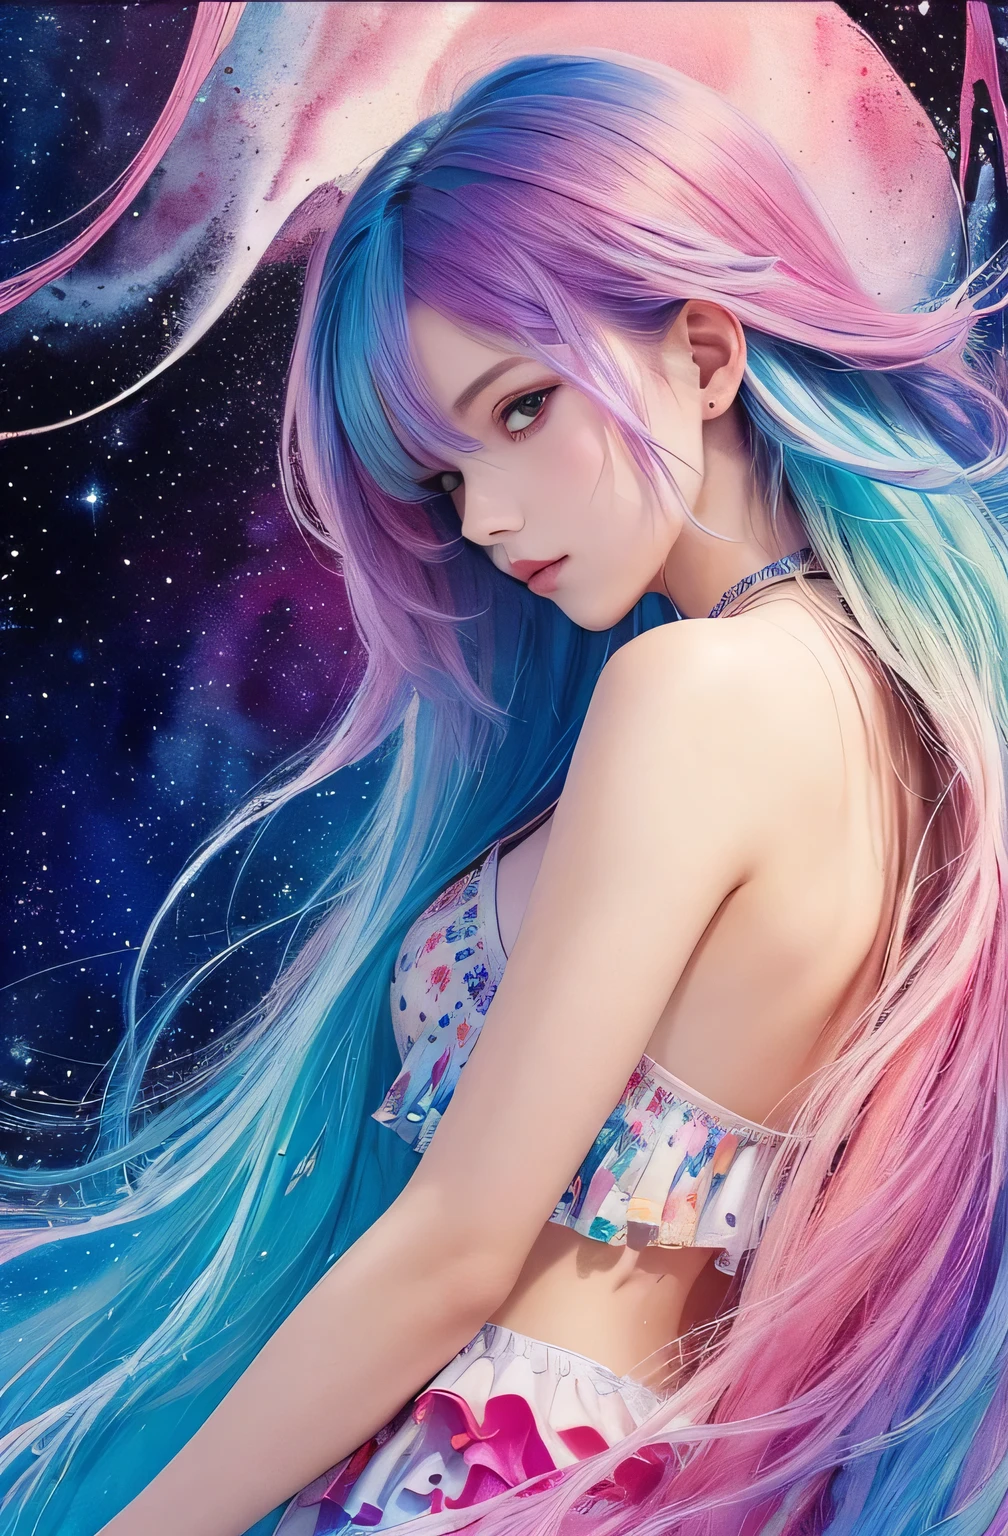 (masterpiece, highest quality, highest quality,watercolor (Moderate),Official Art, beautifully、aesthetic:1.2),(One girl:1.3), (Fractal Art:1.3),Upper Body, From the side, View your viewers,pattern,(Rainbow Hair,colorful hair,Half Blue、Half pink hair:1.2),water,liquid, cloud,colorful, Starry sky,performer,looking at the camera,Full body